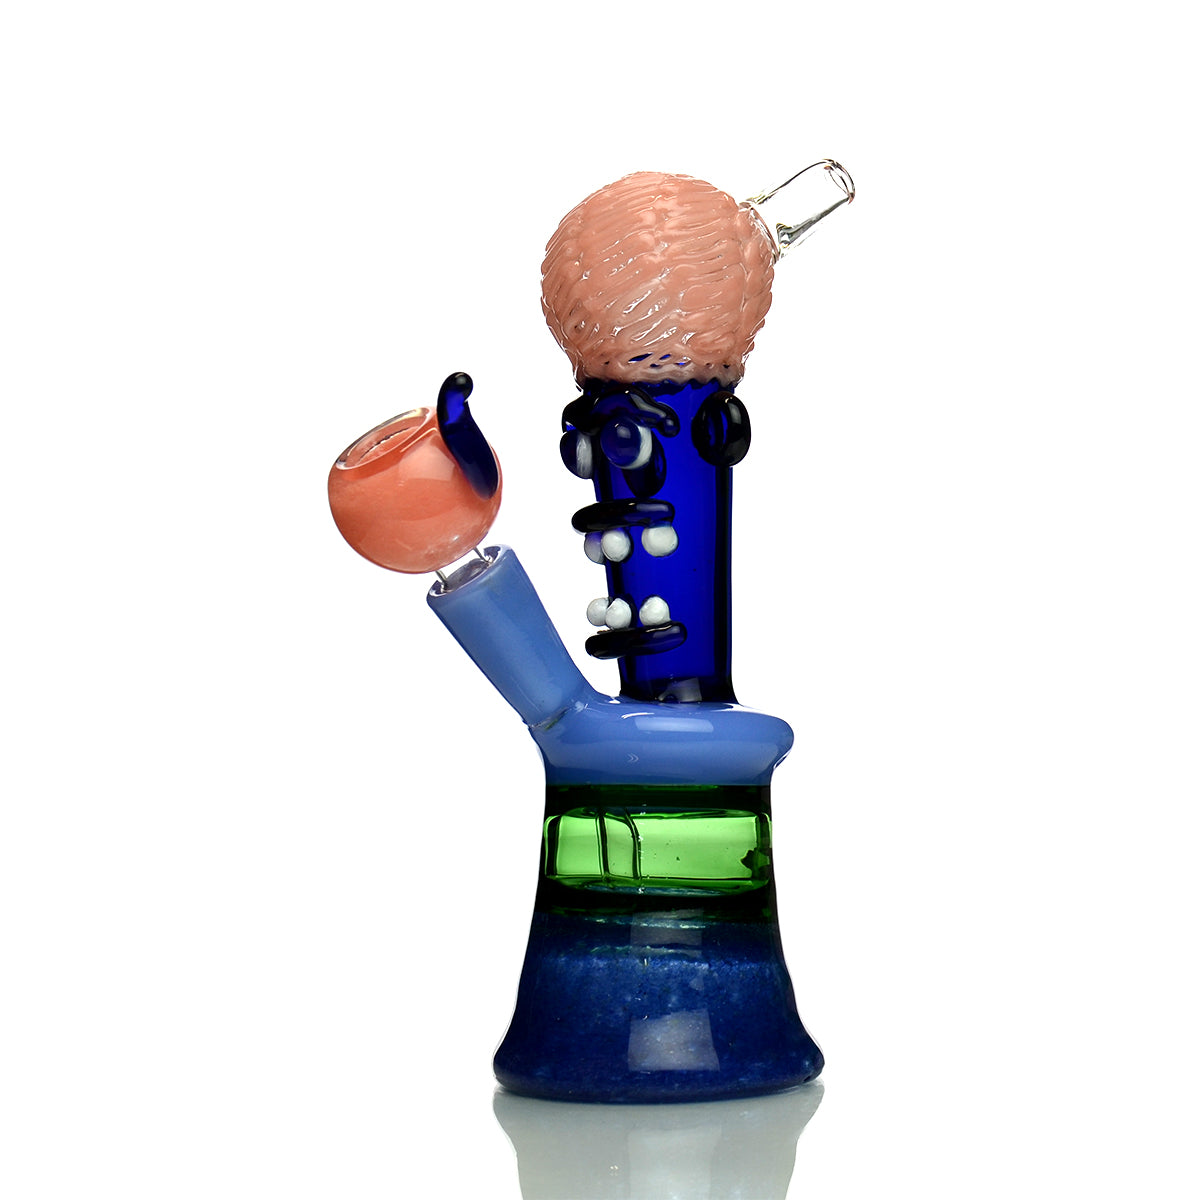 9" Mind Game Water Pipe Art with 14mm Male Bowl